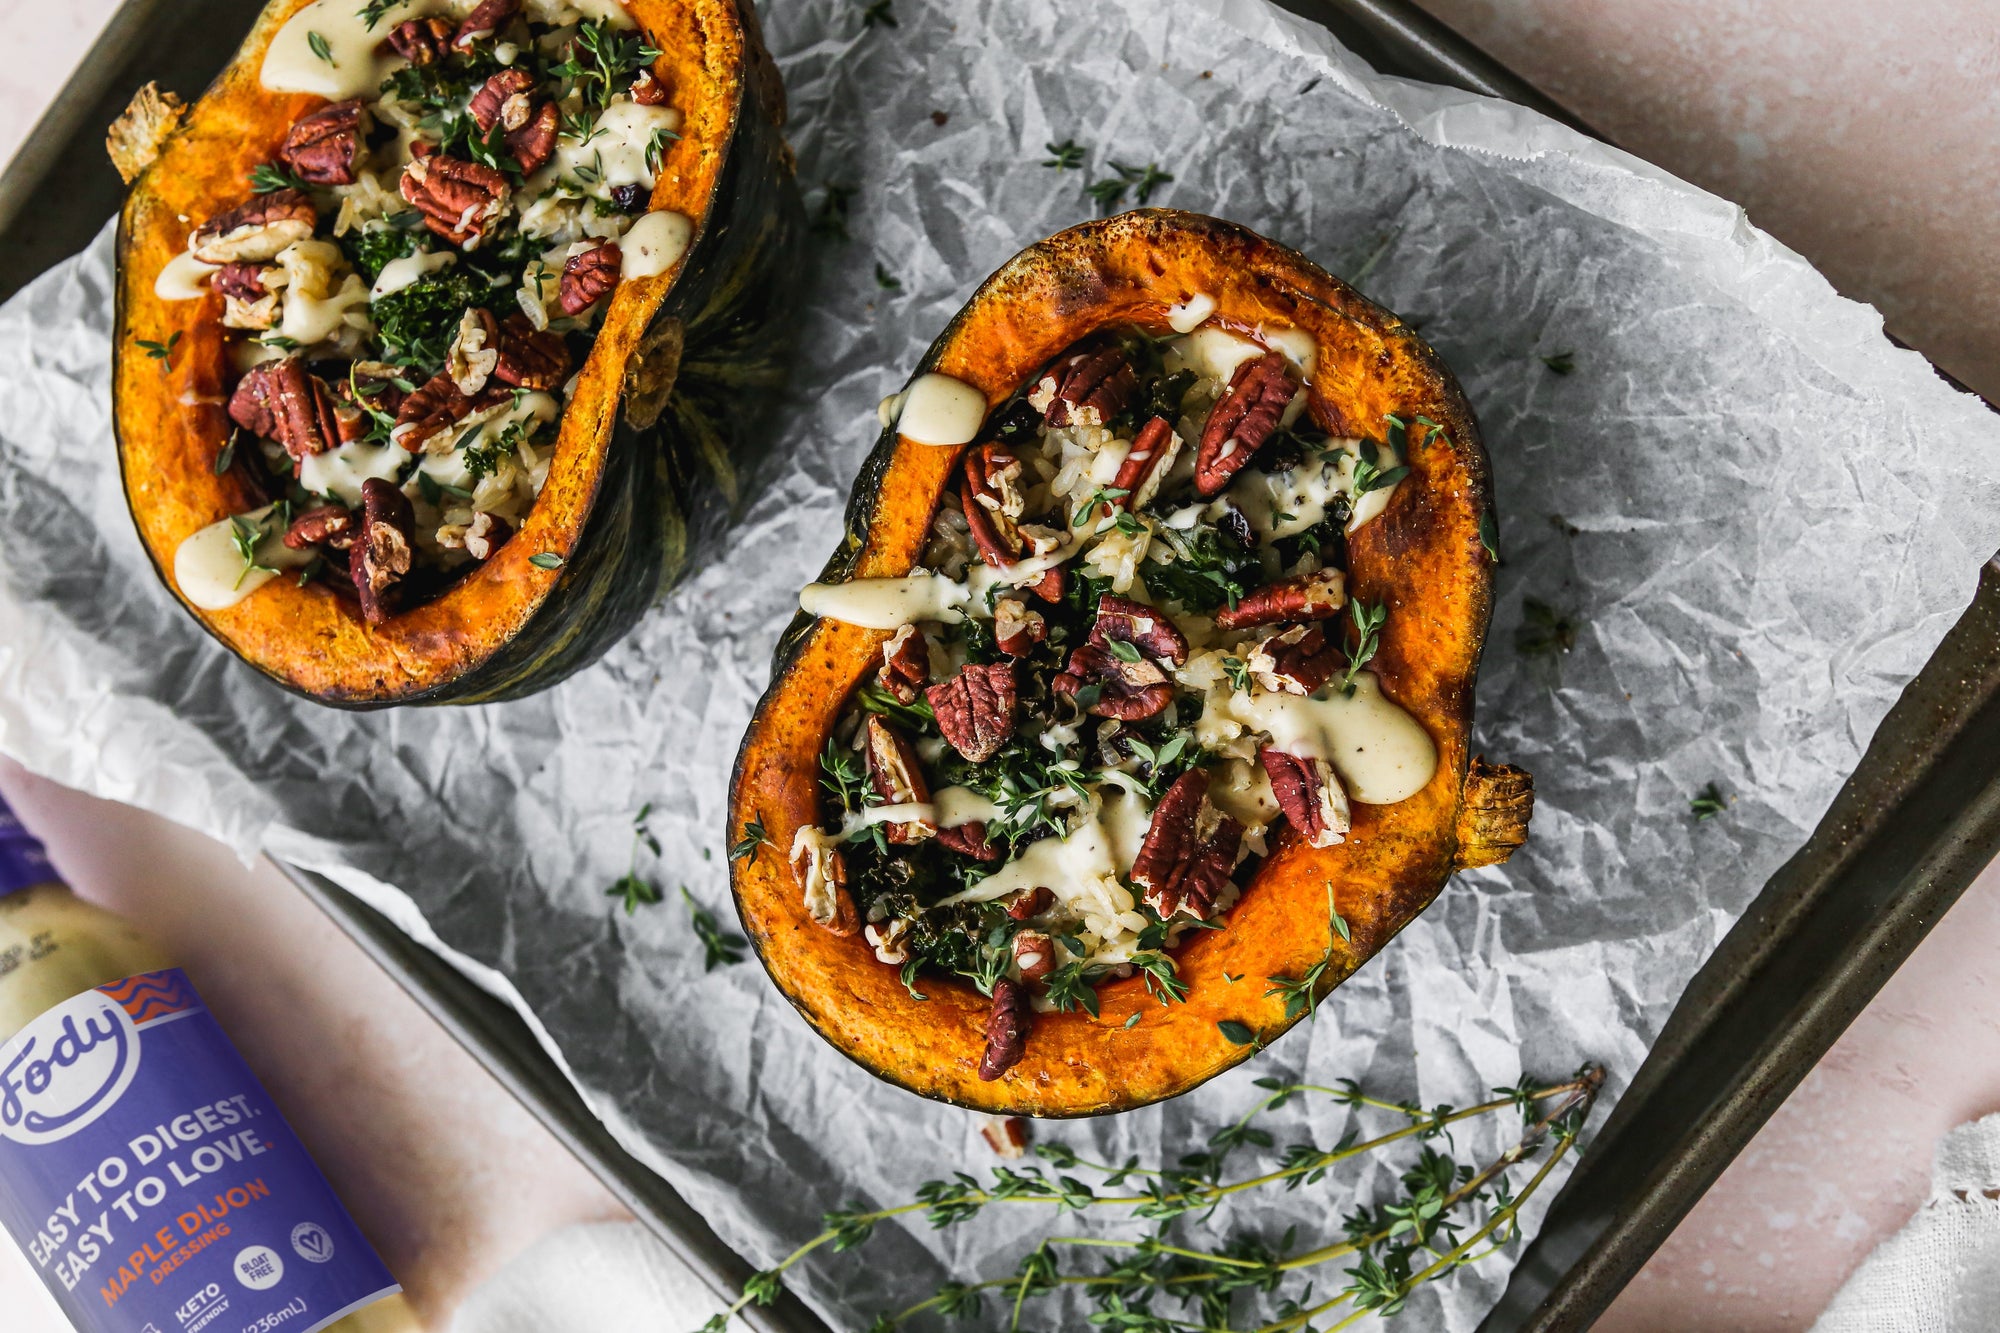 Image of a low-FODMAP stuffed kabocha squash side dish: two squash halves lie on a baking sheet, stuffed with vegetables and drizzled with Fody's maple dijon.